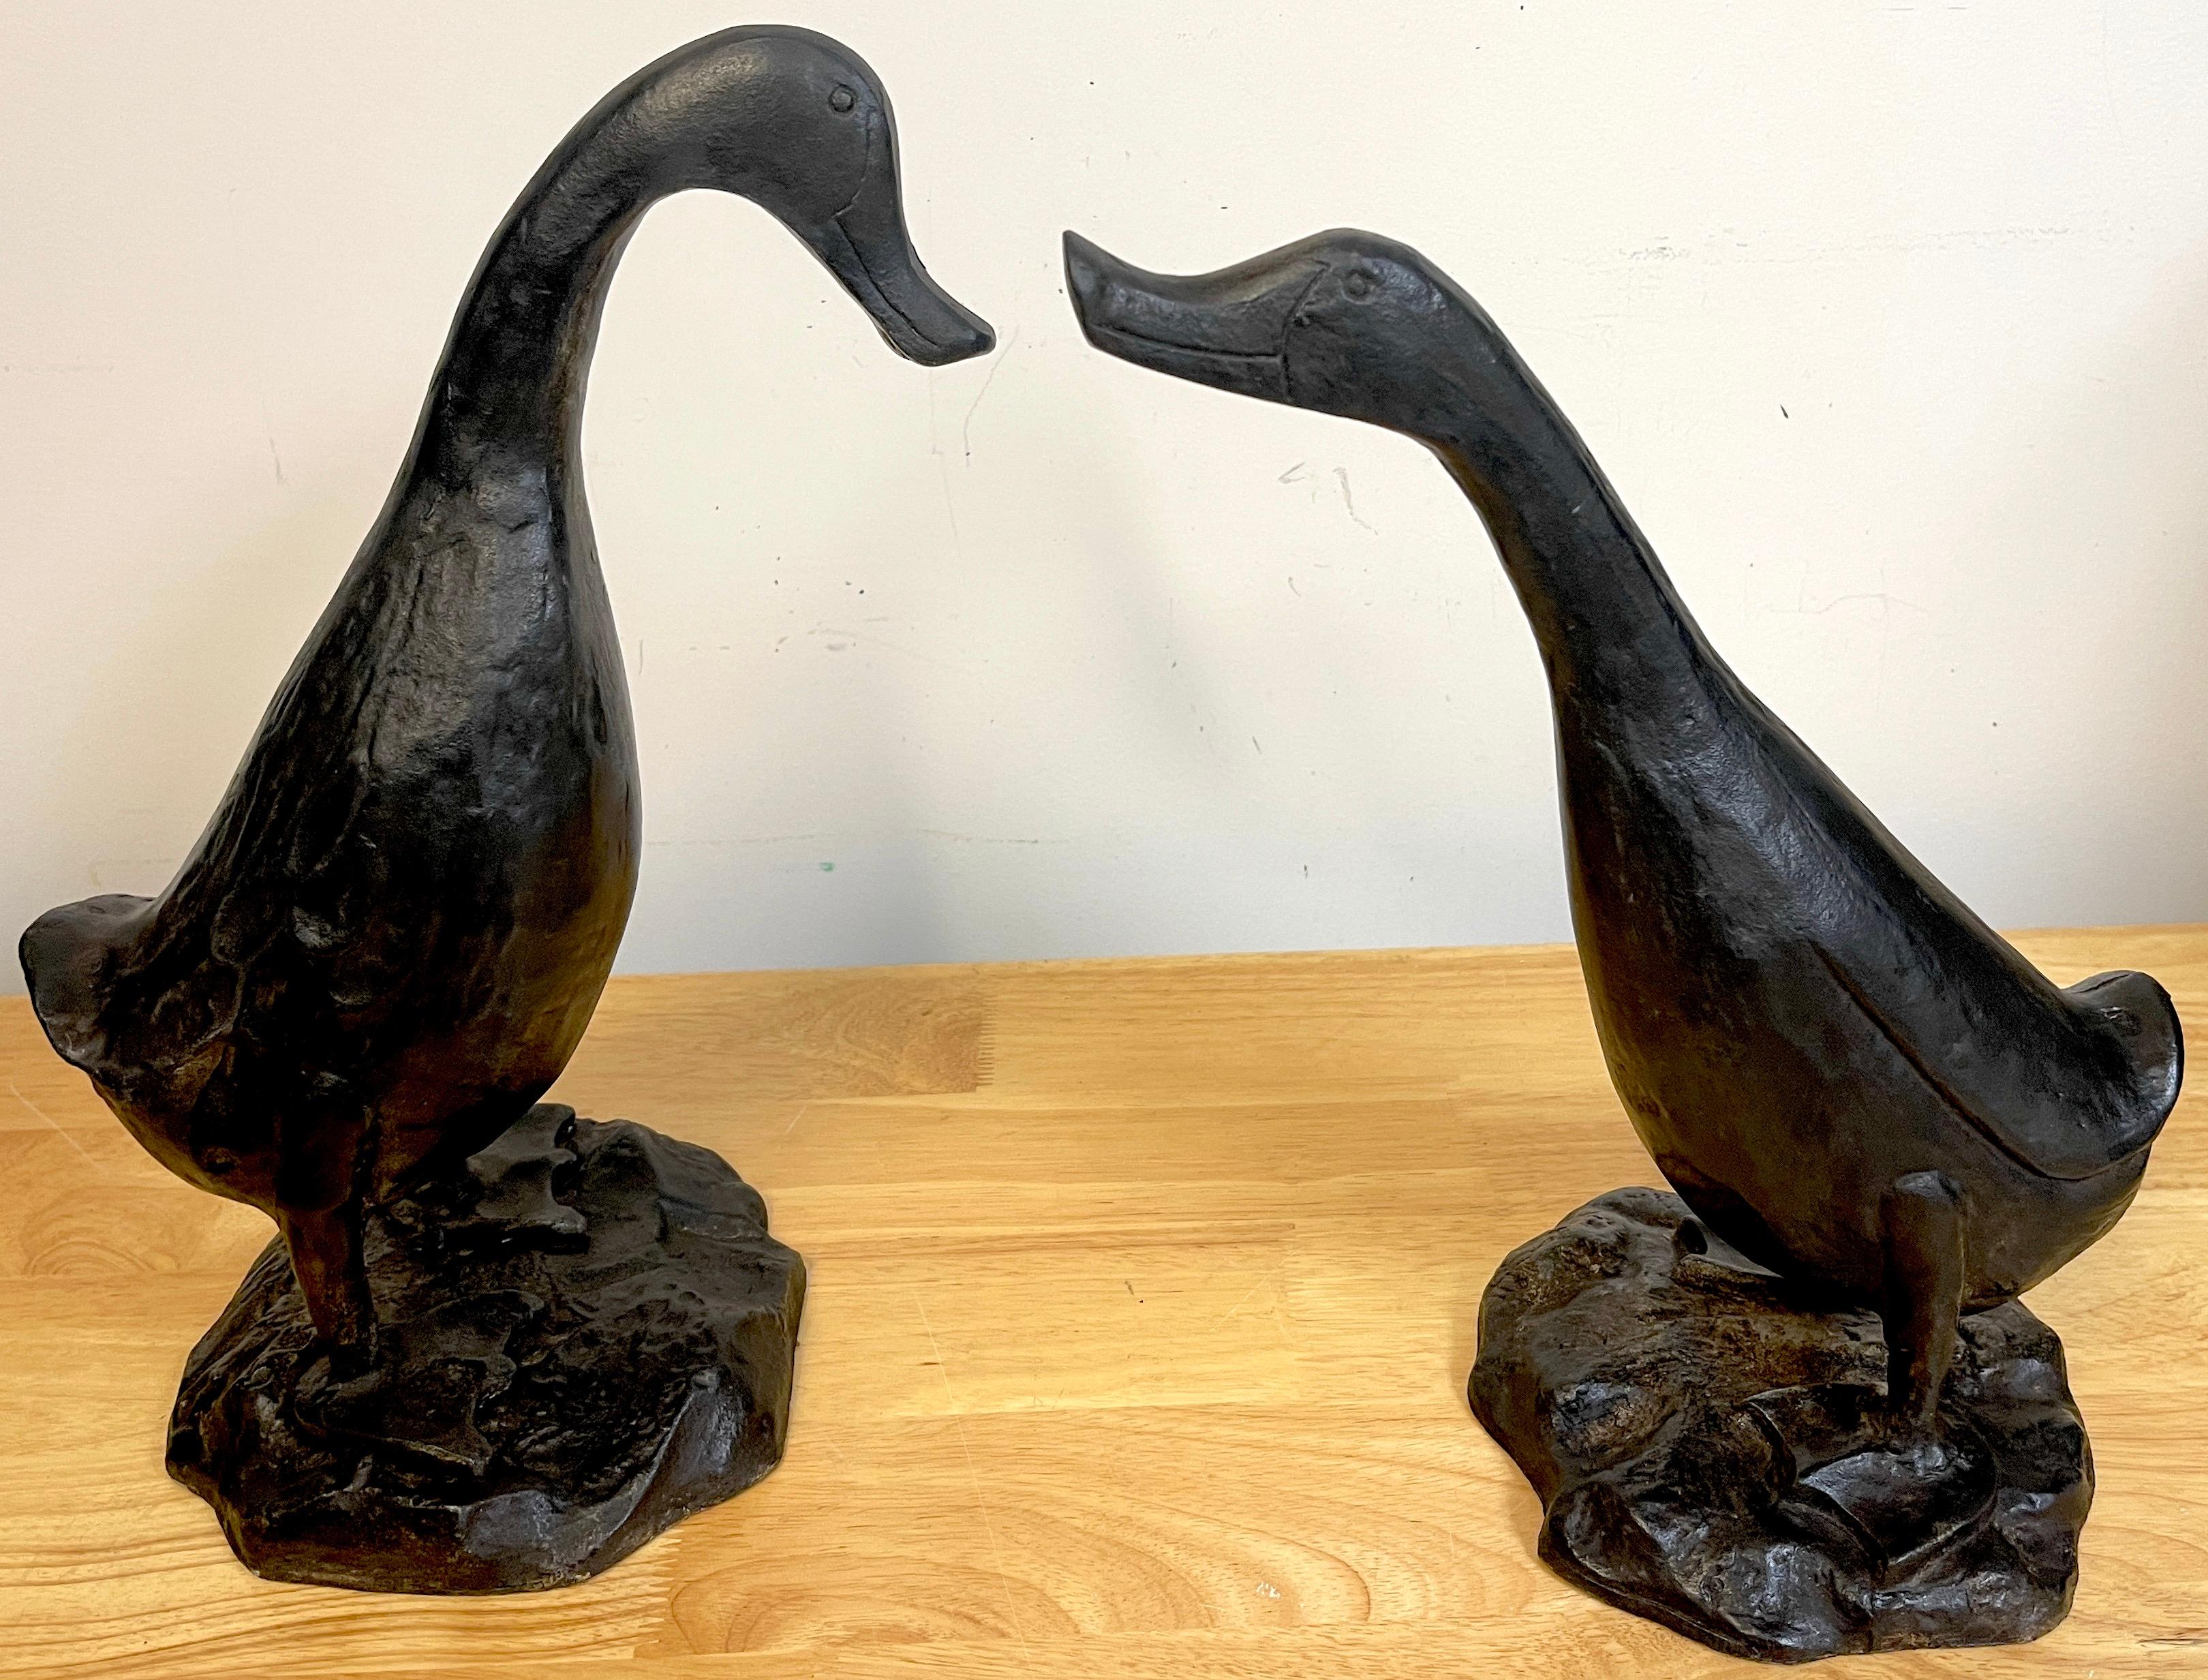 Pair of Whimsical Art Deco Garden Sculptures of Ducks, cast in muted expressiveness, one is slightly larger, both standing on rock work bases. Unsigned, Can be used outdoors or indoors 
Measures: Larger 15' H x 11